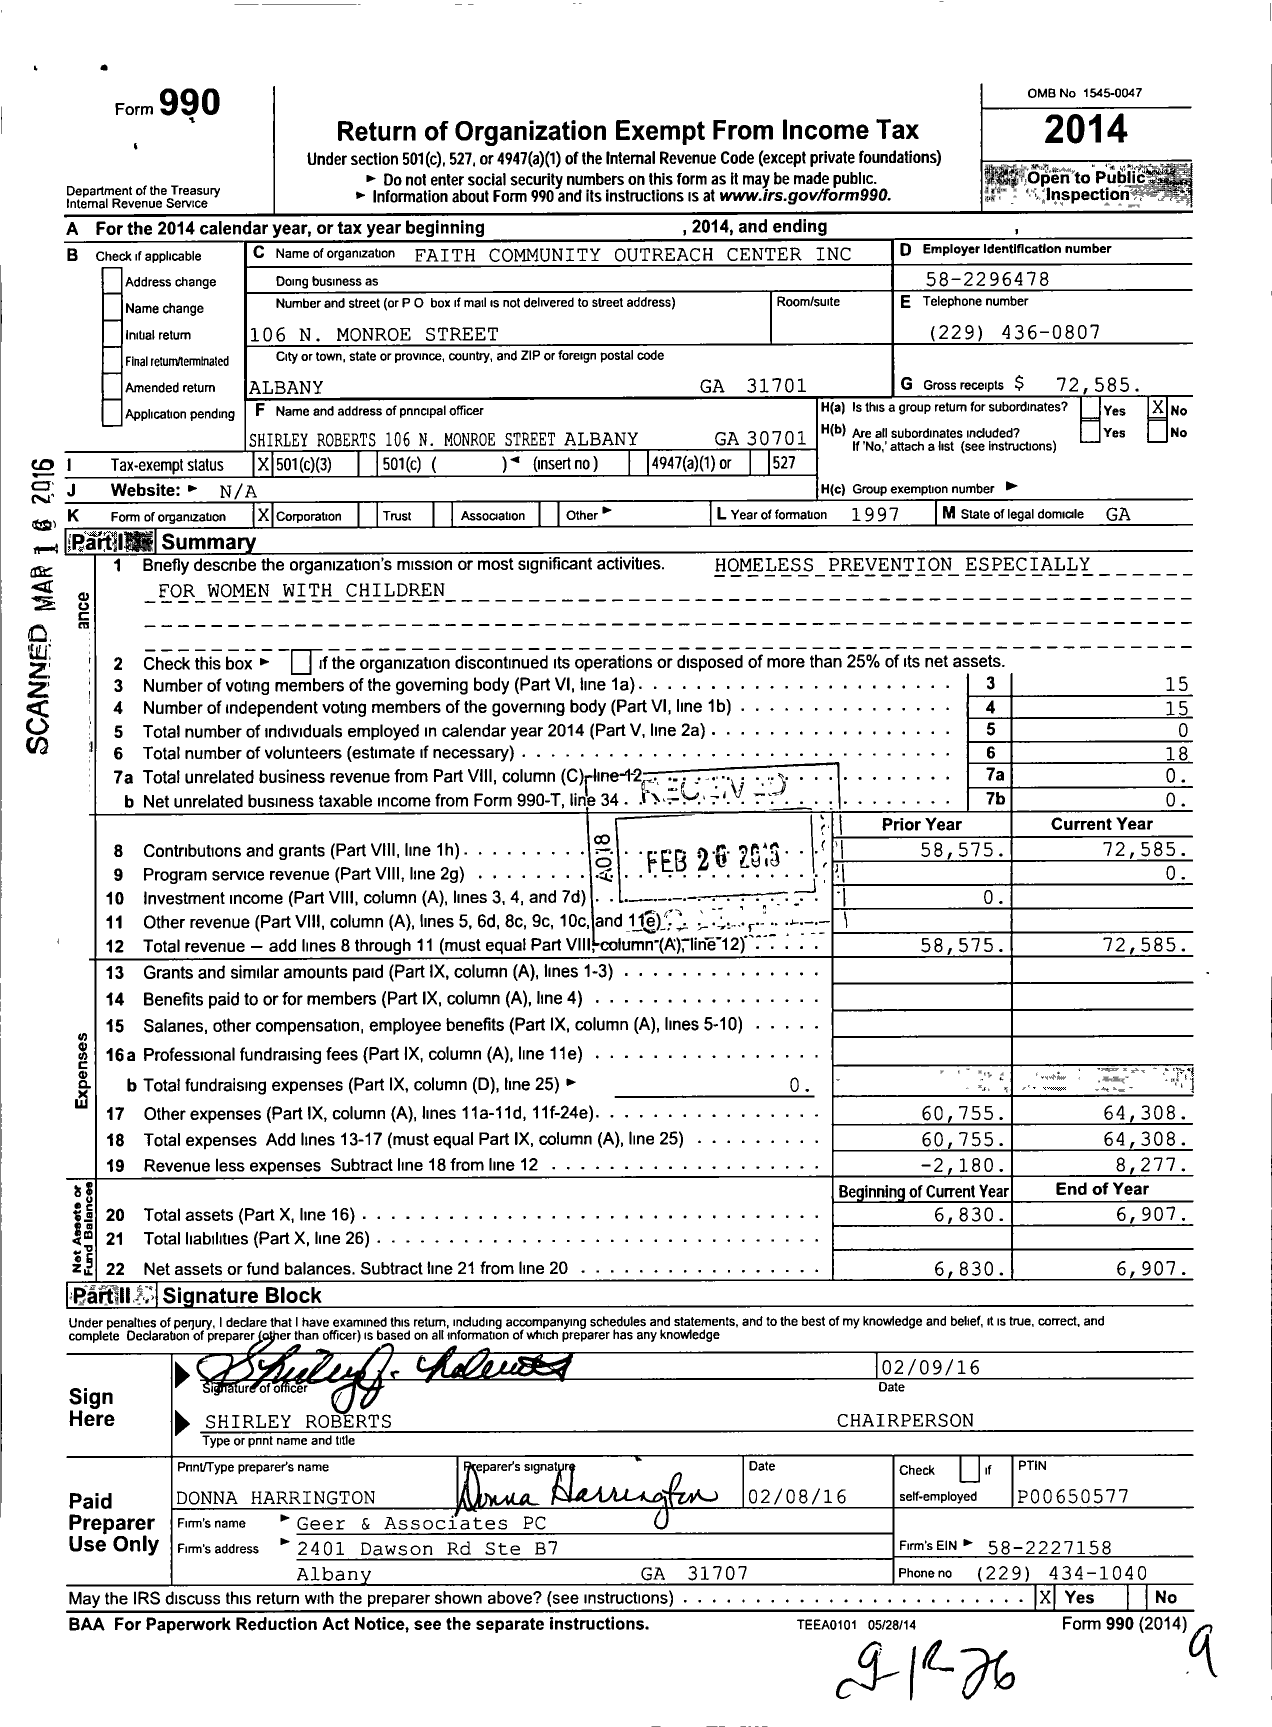 Image of first page of 2014 Form 990 for Faith Community Outreach Center